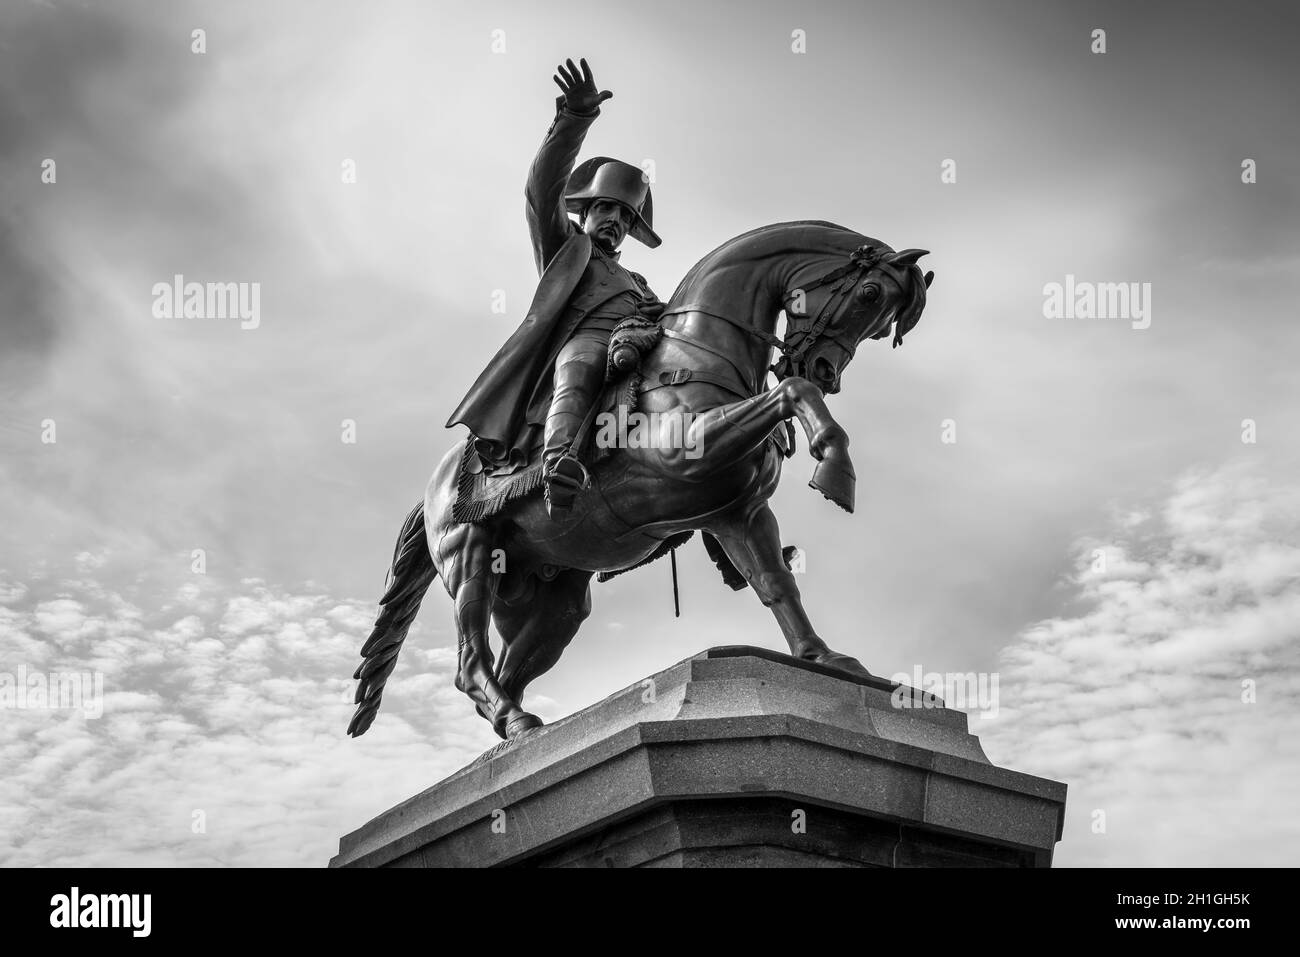 Cherbourg-Octeville, France - May 22, 2017: Napoleon statue on Horseback, the work of Armand Le Veel, located at Napoleon Square in Cherbourg-Octevill Stock Photo